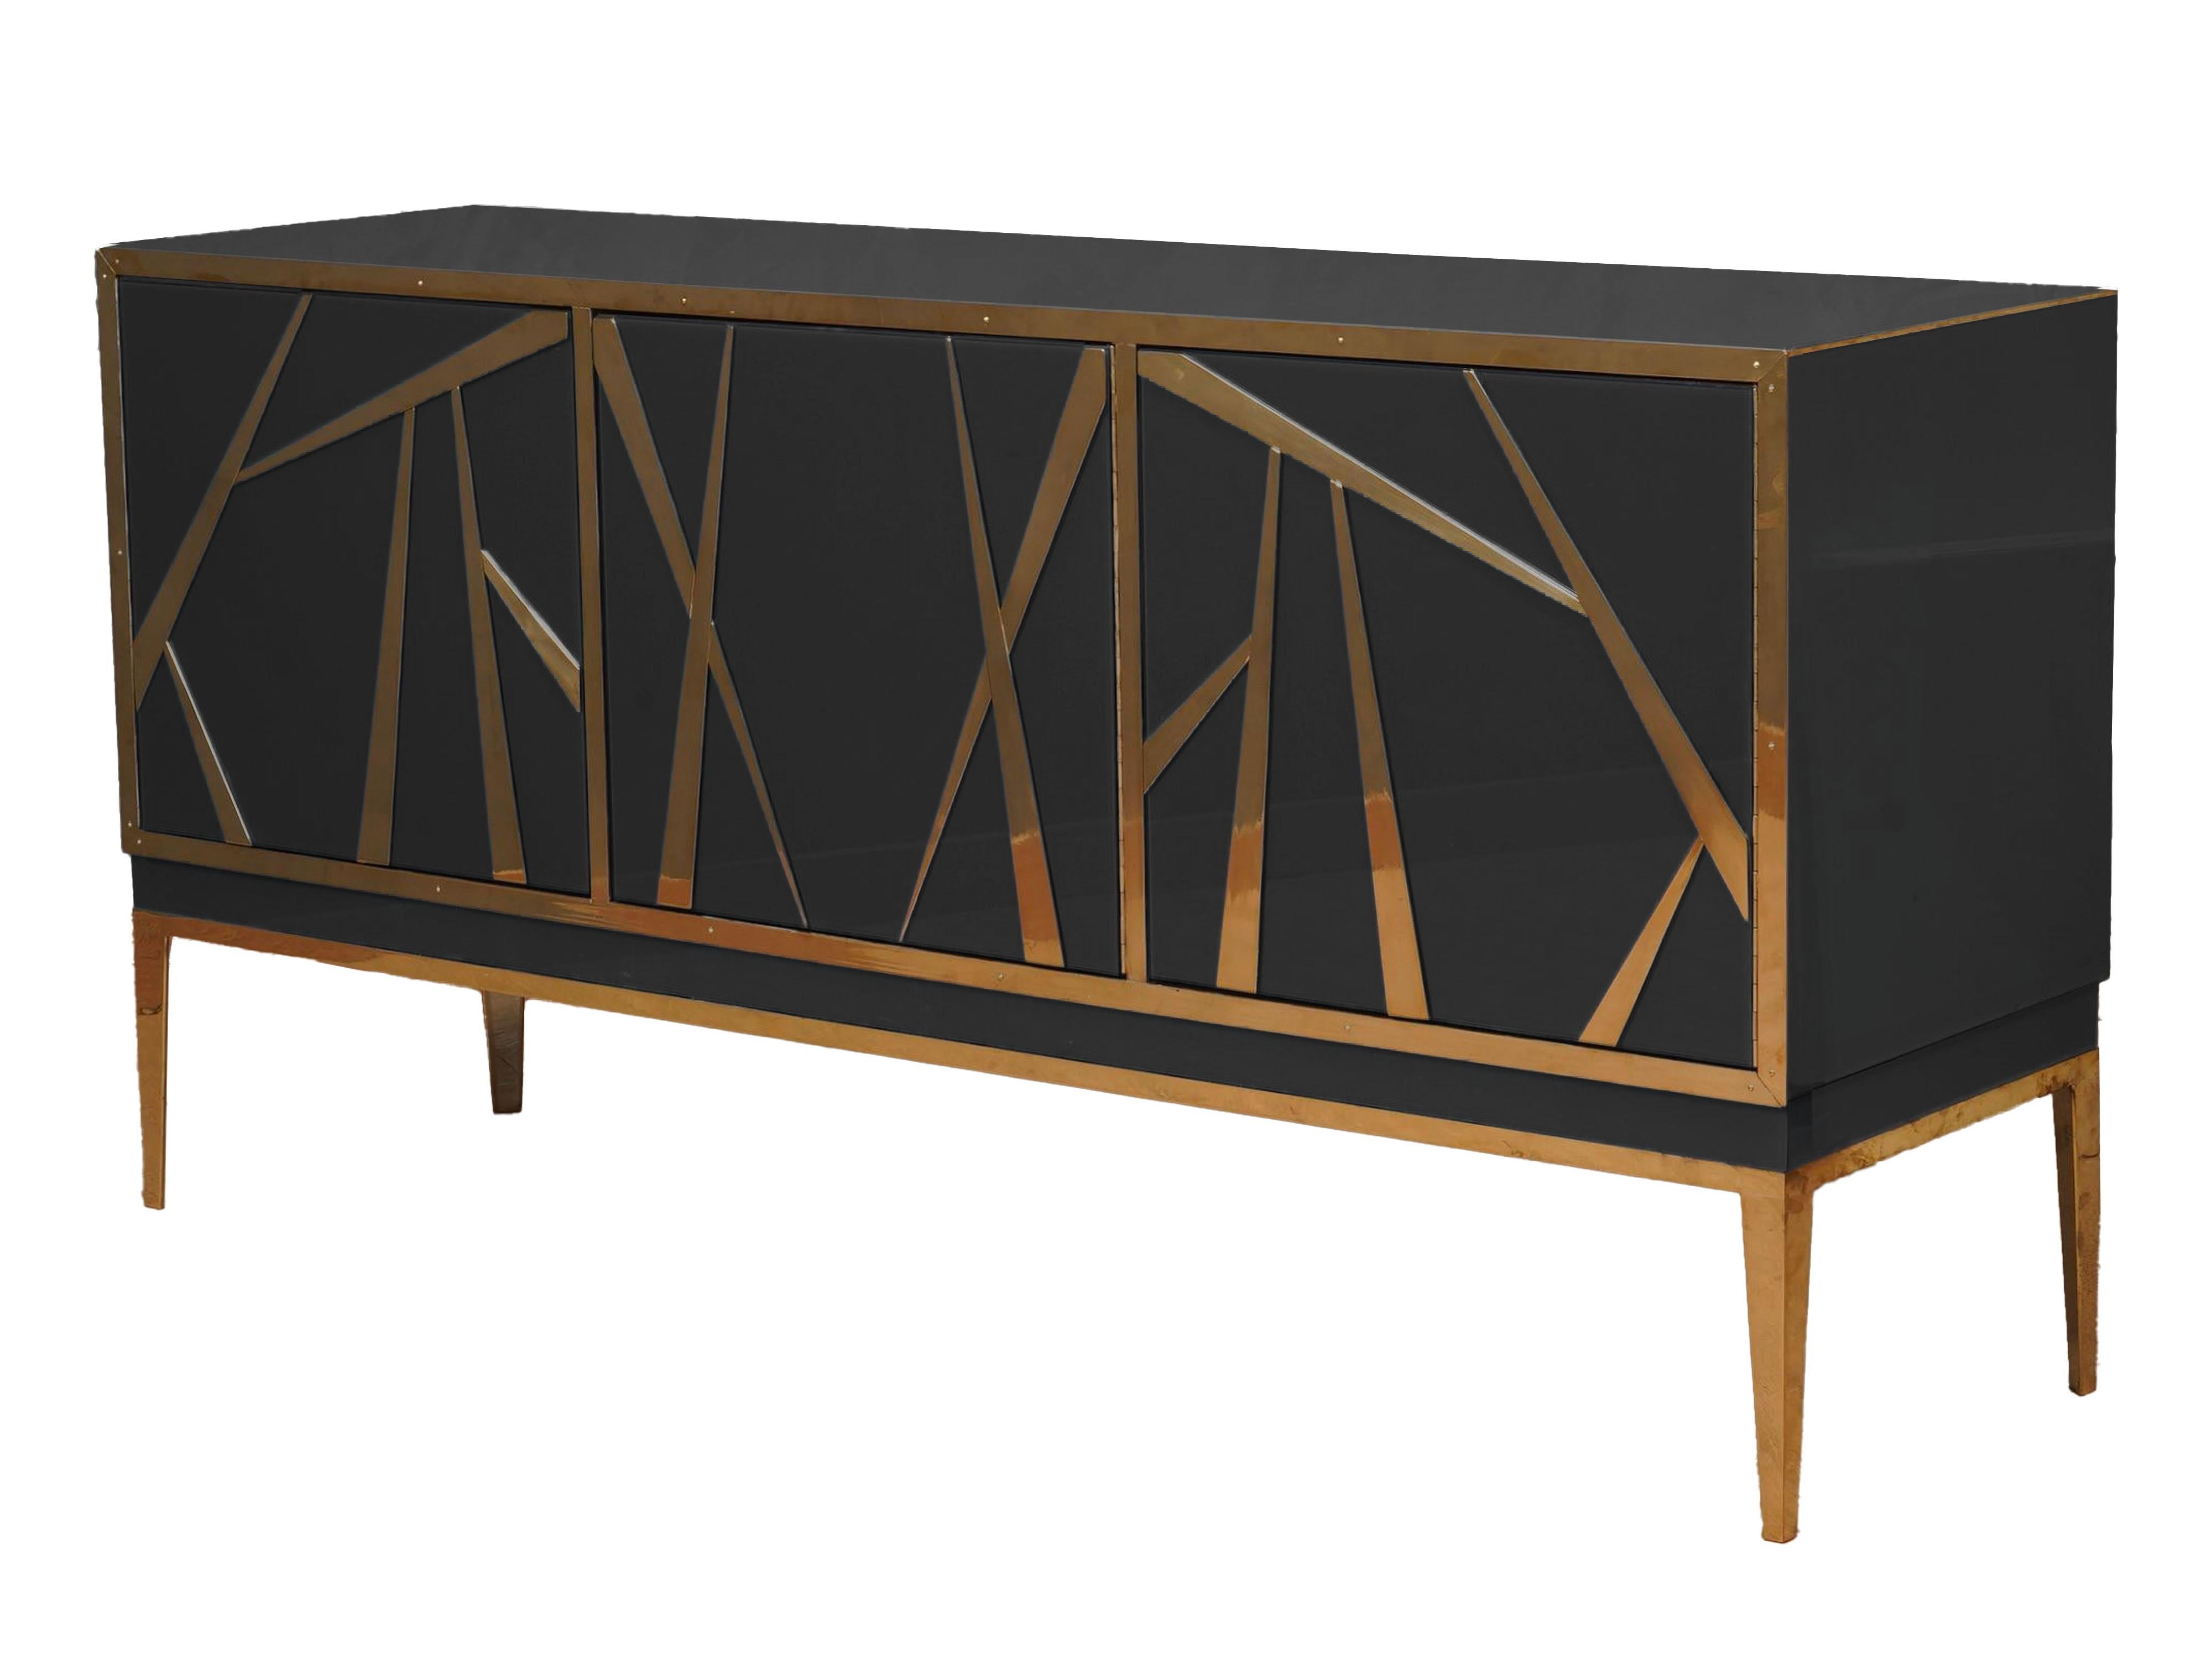 Italian craftsmanship with this luxurious Black Italian Luxury Sideboard, a unique masterpiece in Mid-Century style, currently available at auction. 

Crafted meticulously by skilled artisans, this sideboard features a robust frame of Betulla wood,